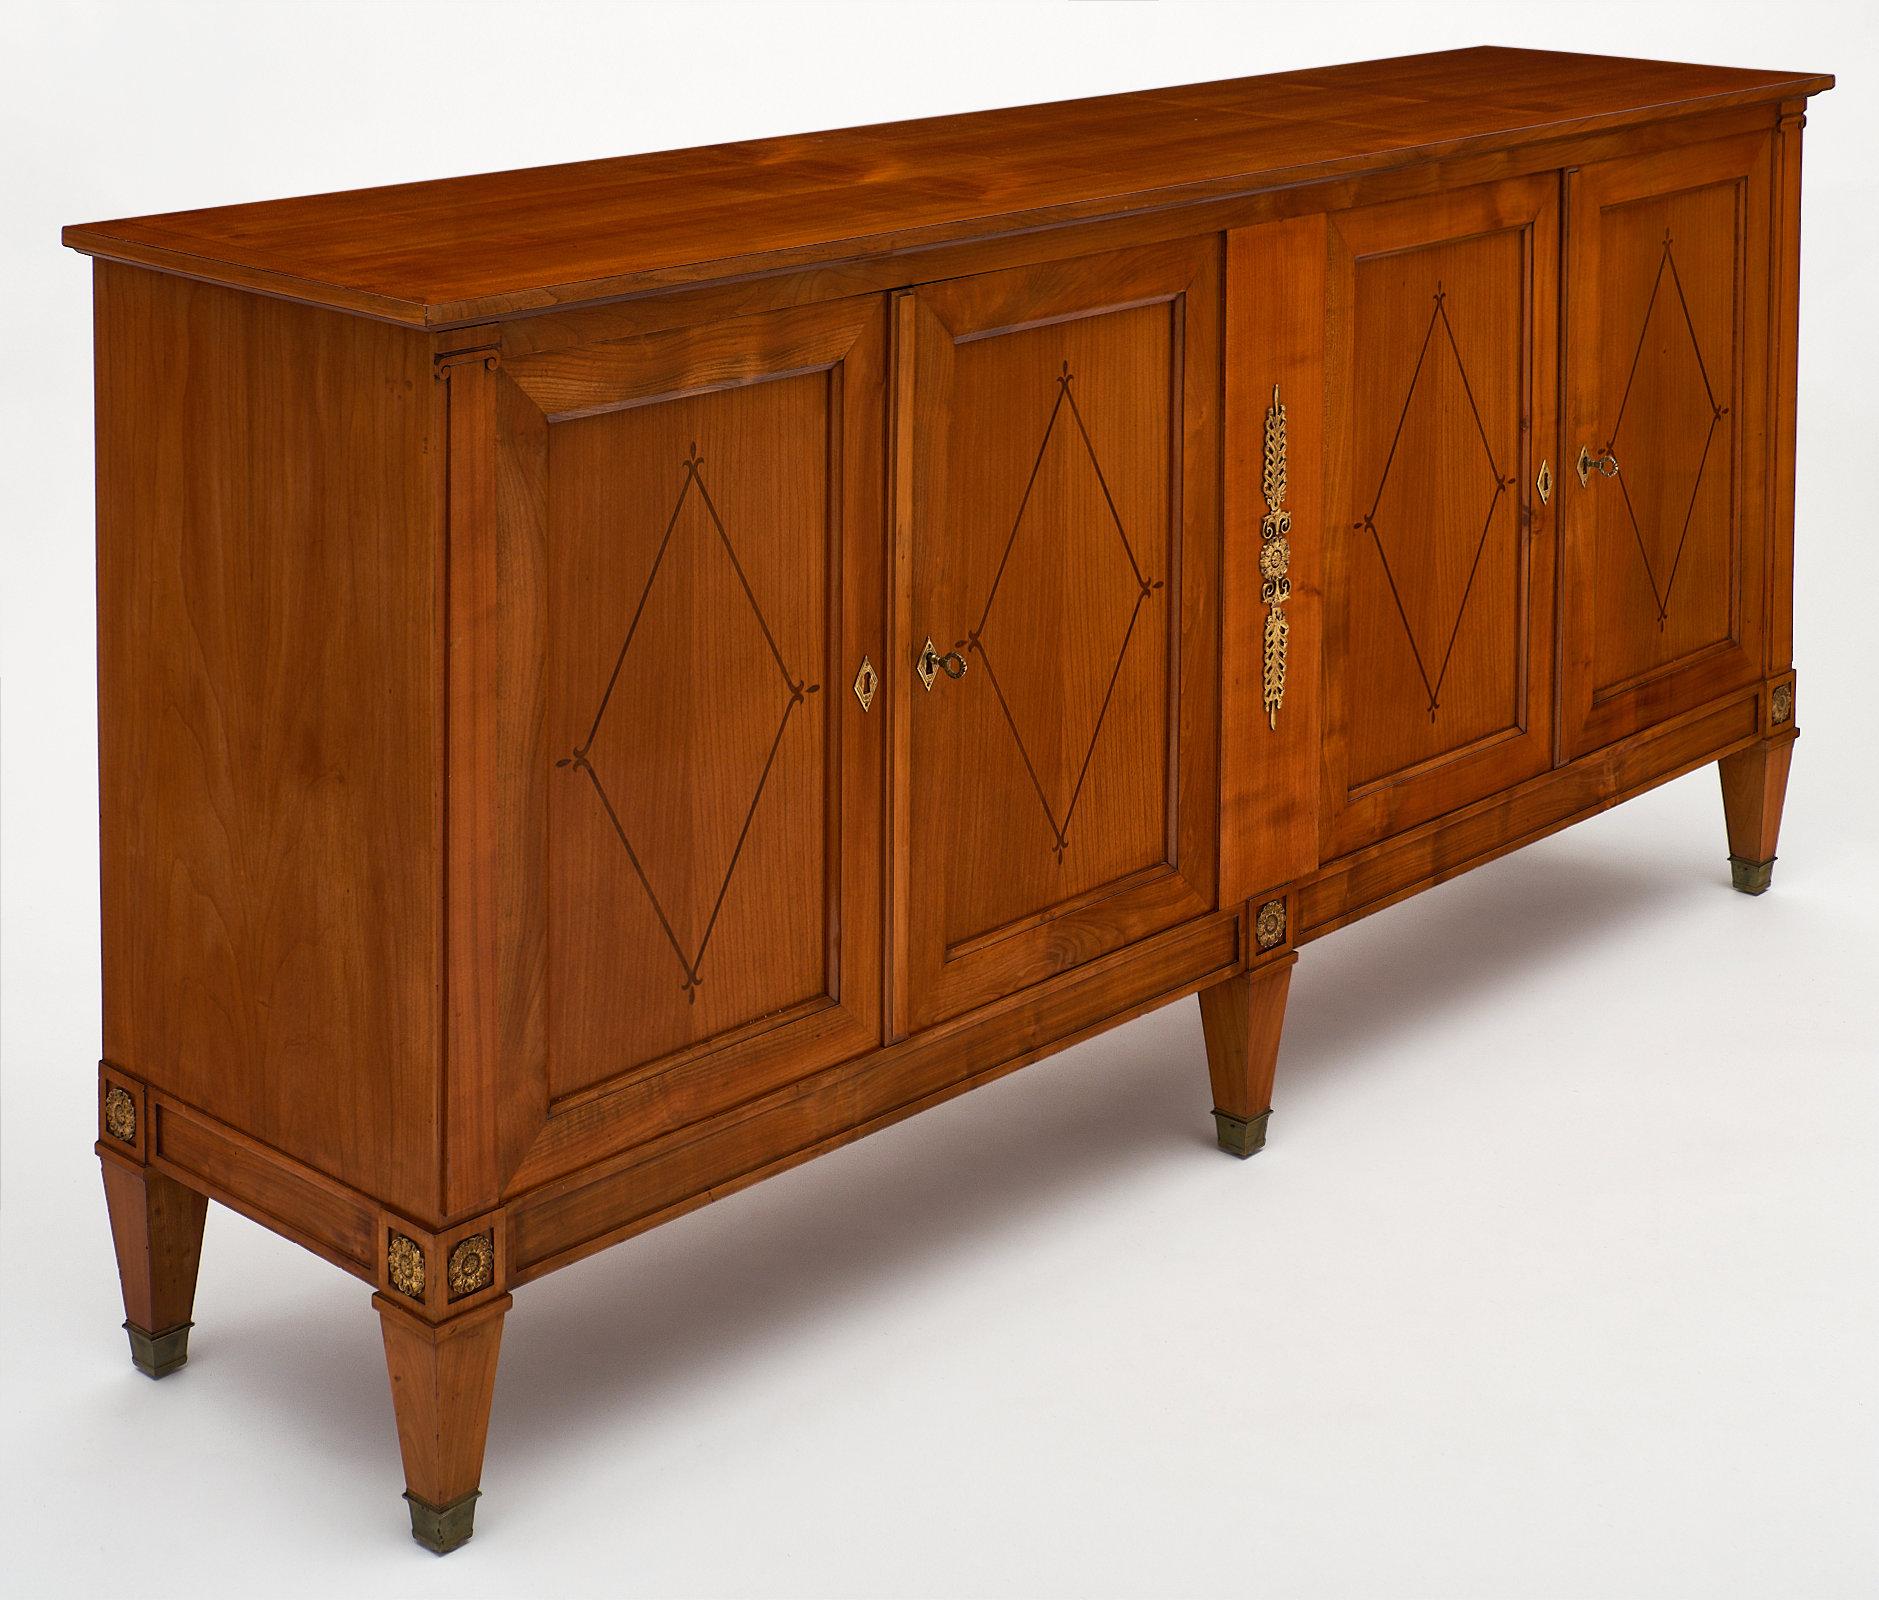 French Directoire style cherrywood buffet with ebony inlay on the doors. We love the beautiful bronze hardware and Classic details of this elegant piece. The doors have working locks and keys and open to reveal interior shelving. This piece has been